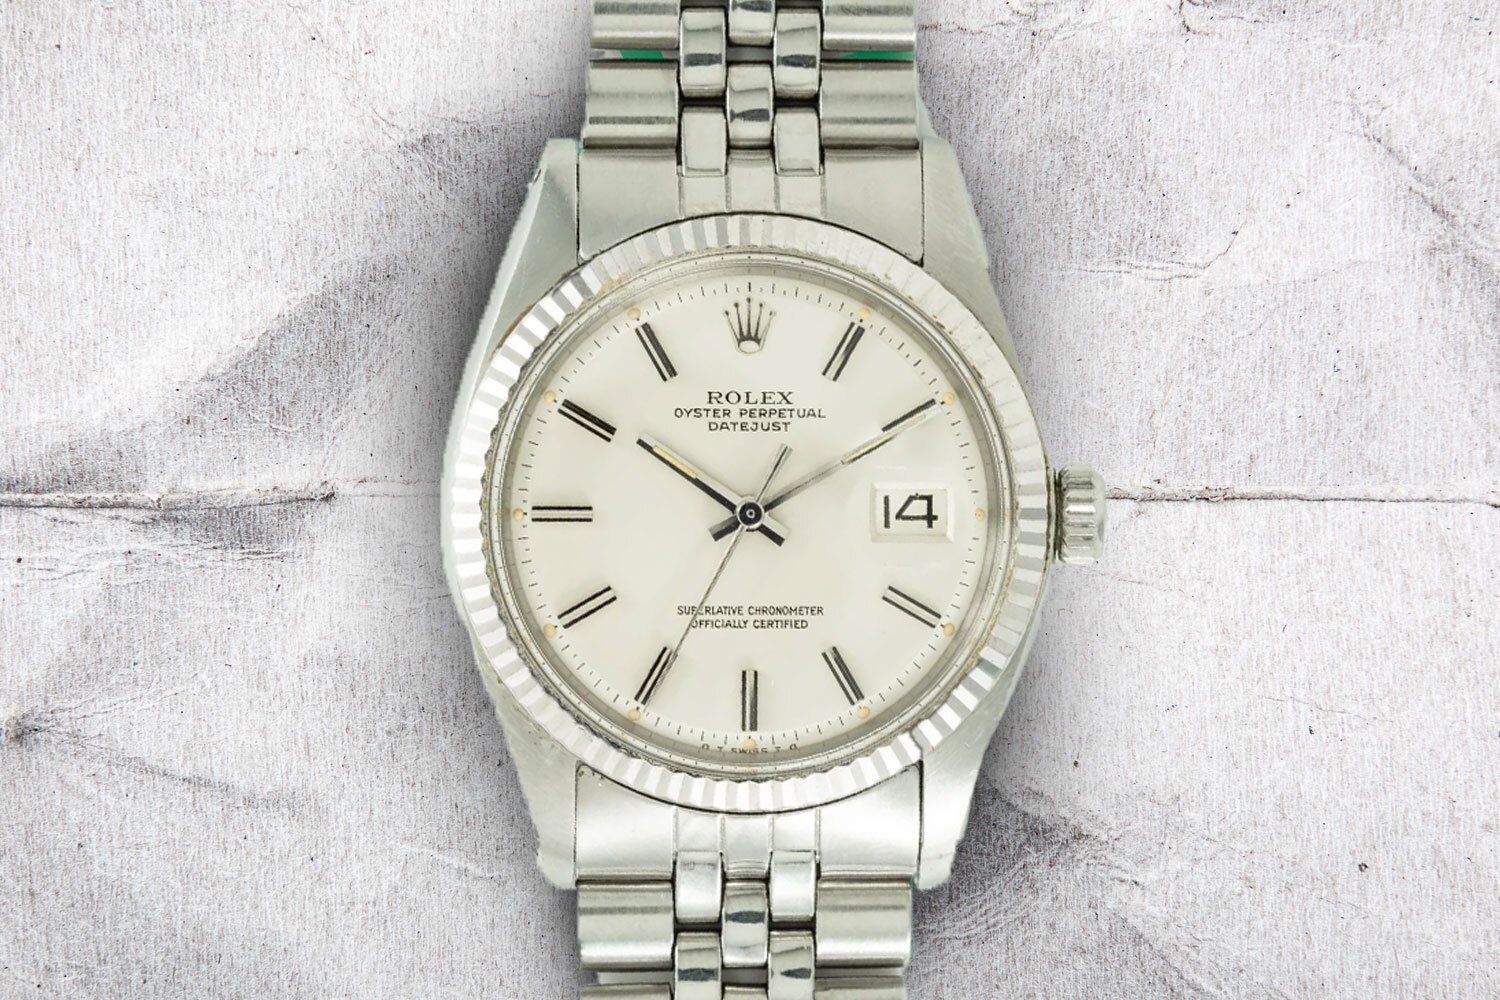 A great vintage watch under $10,000, the Rolex DateJust Ref 1601 on a gray background